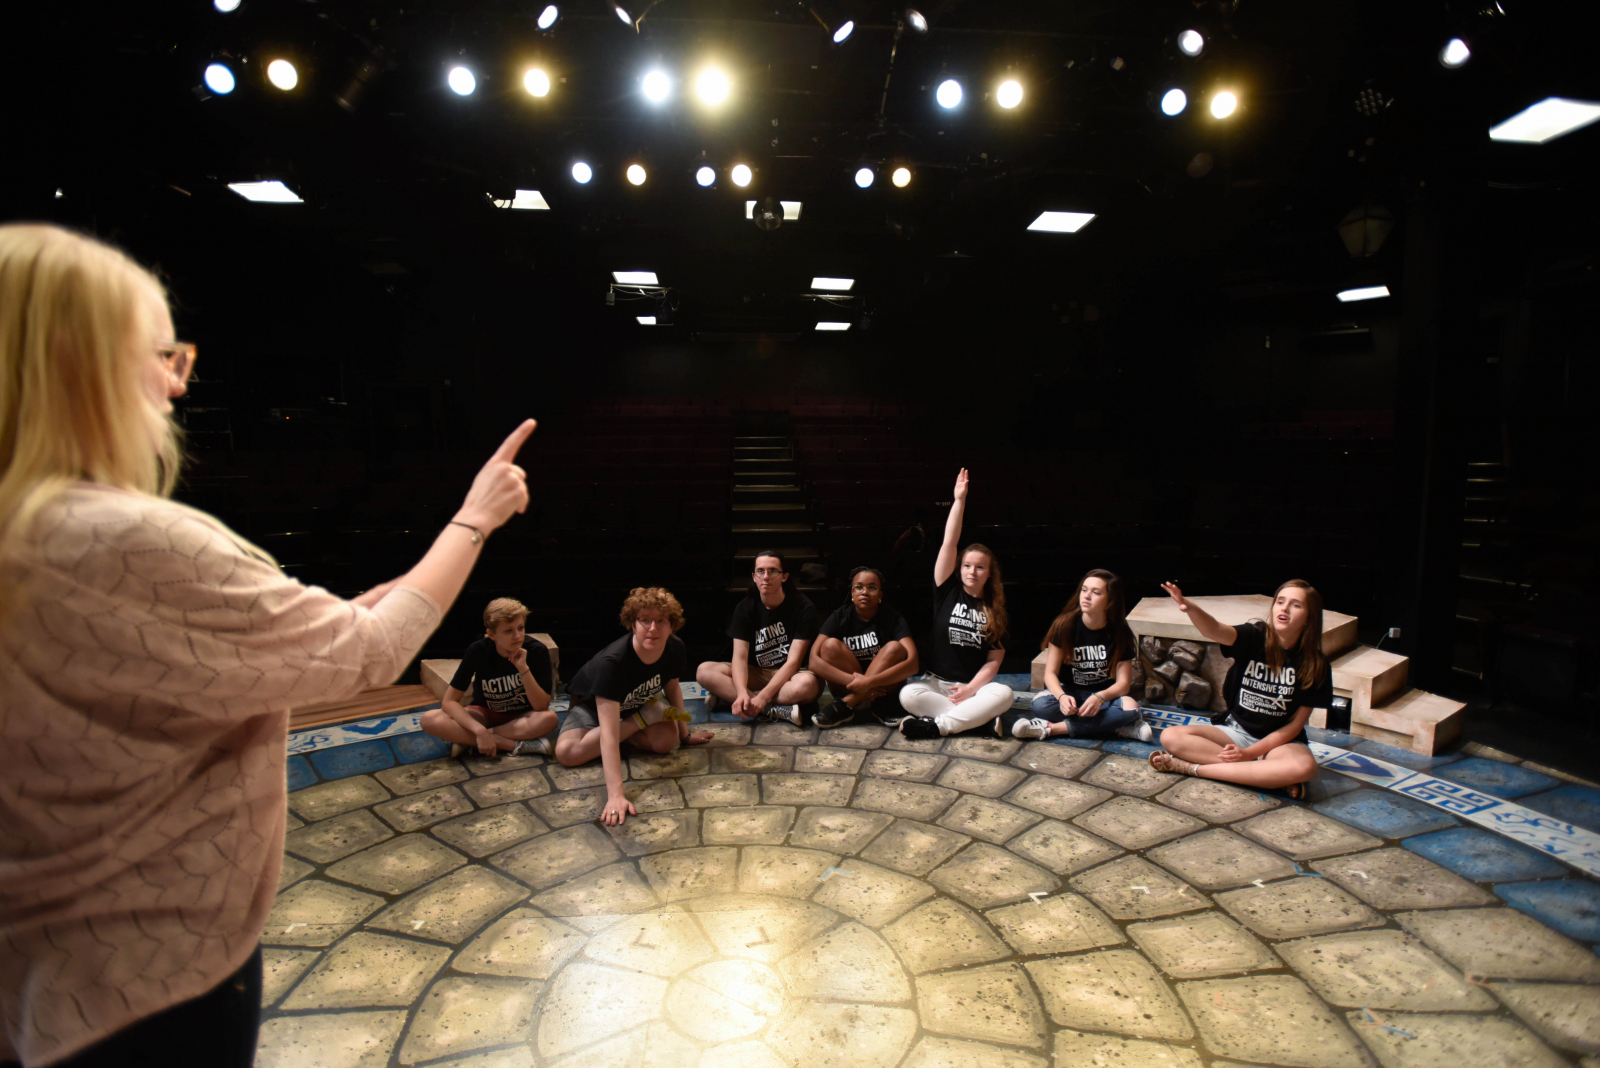 Active Intensive students play theatre games and rehearse their monologs at theREP in Albany Friday, July 21, 2017.